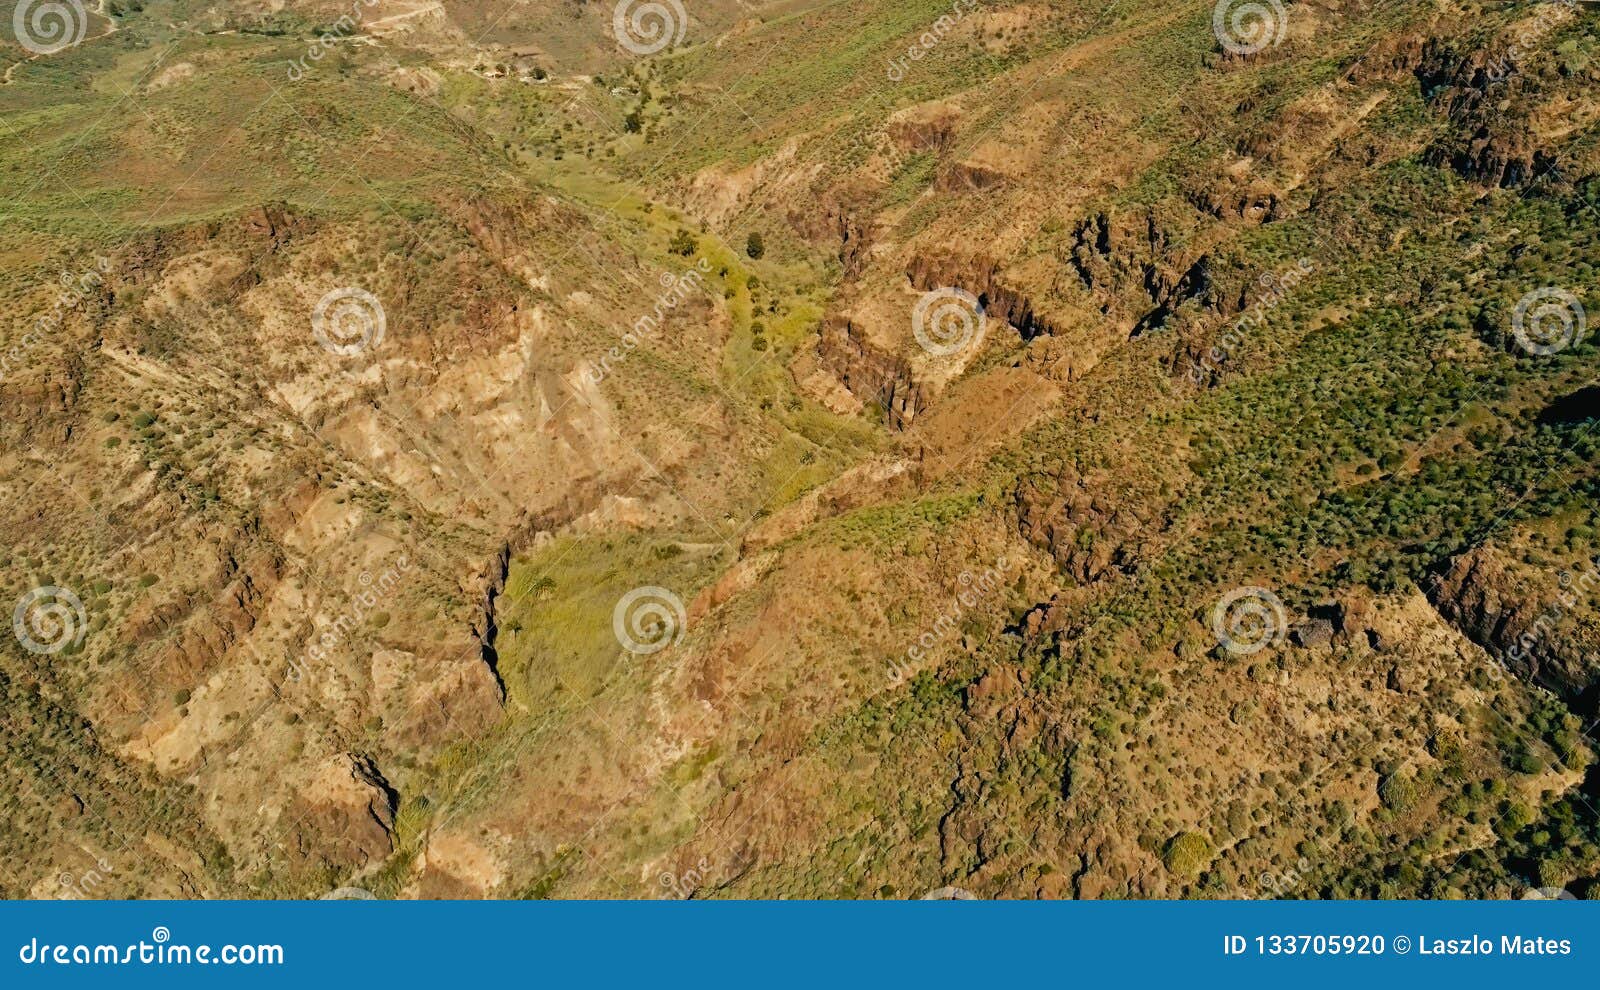 aerial drone image of beautiful stunning landscape view off the degollada de la yegua viewpoint with a valley with palm trees on a